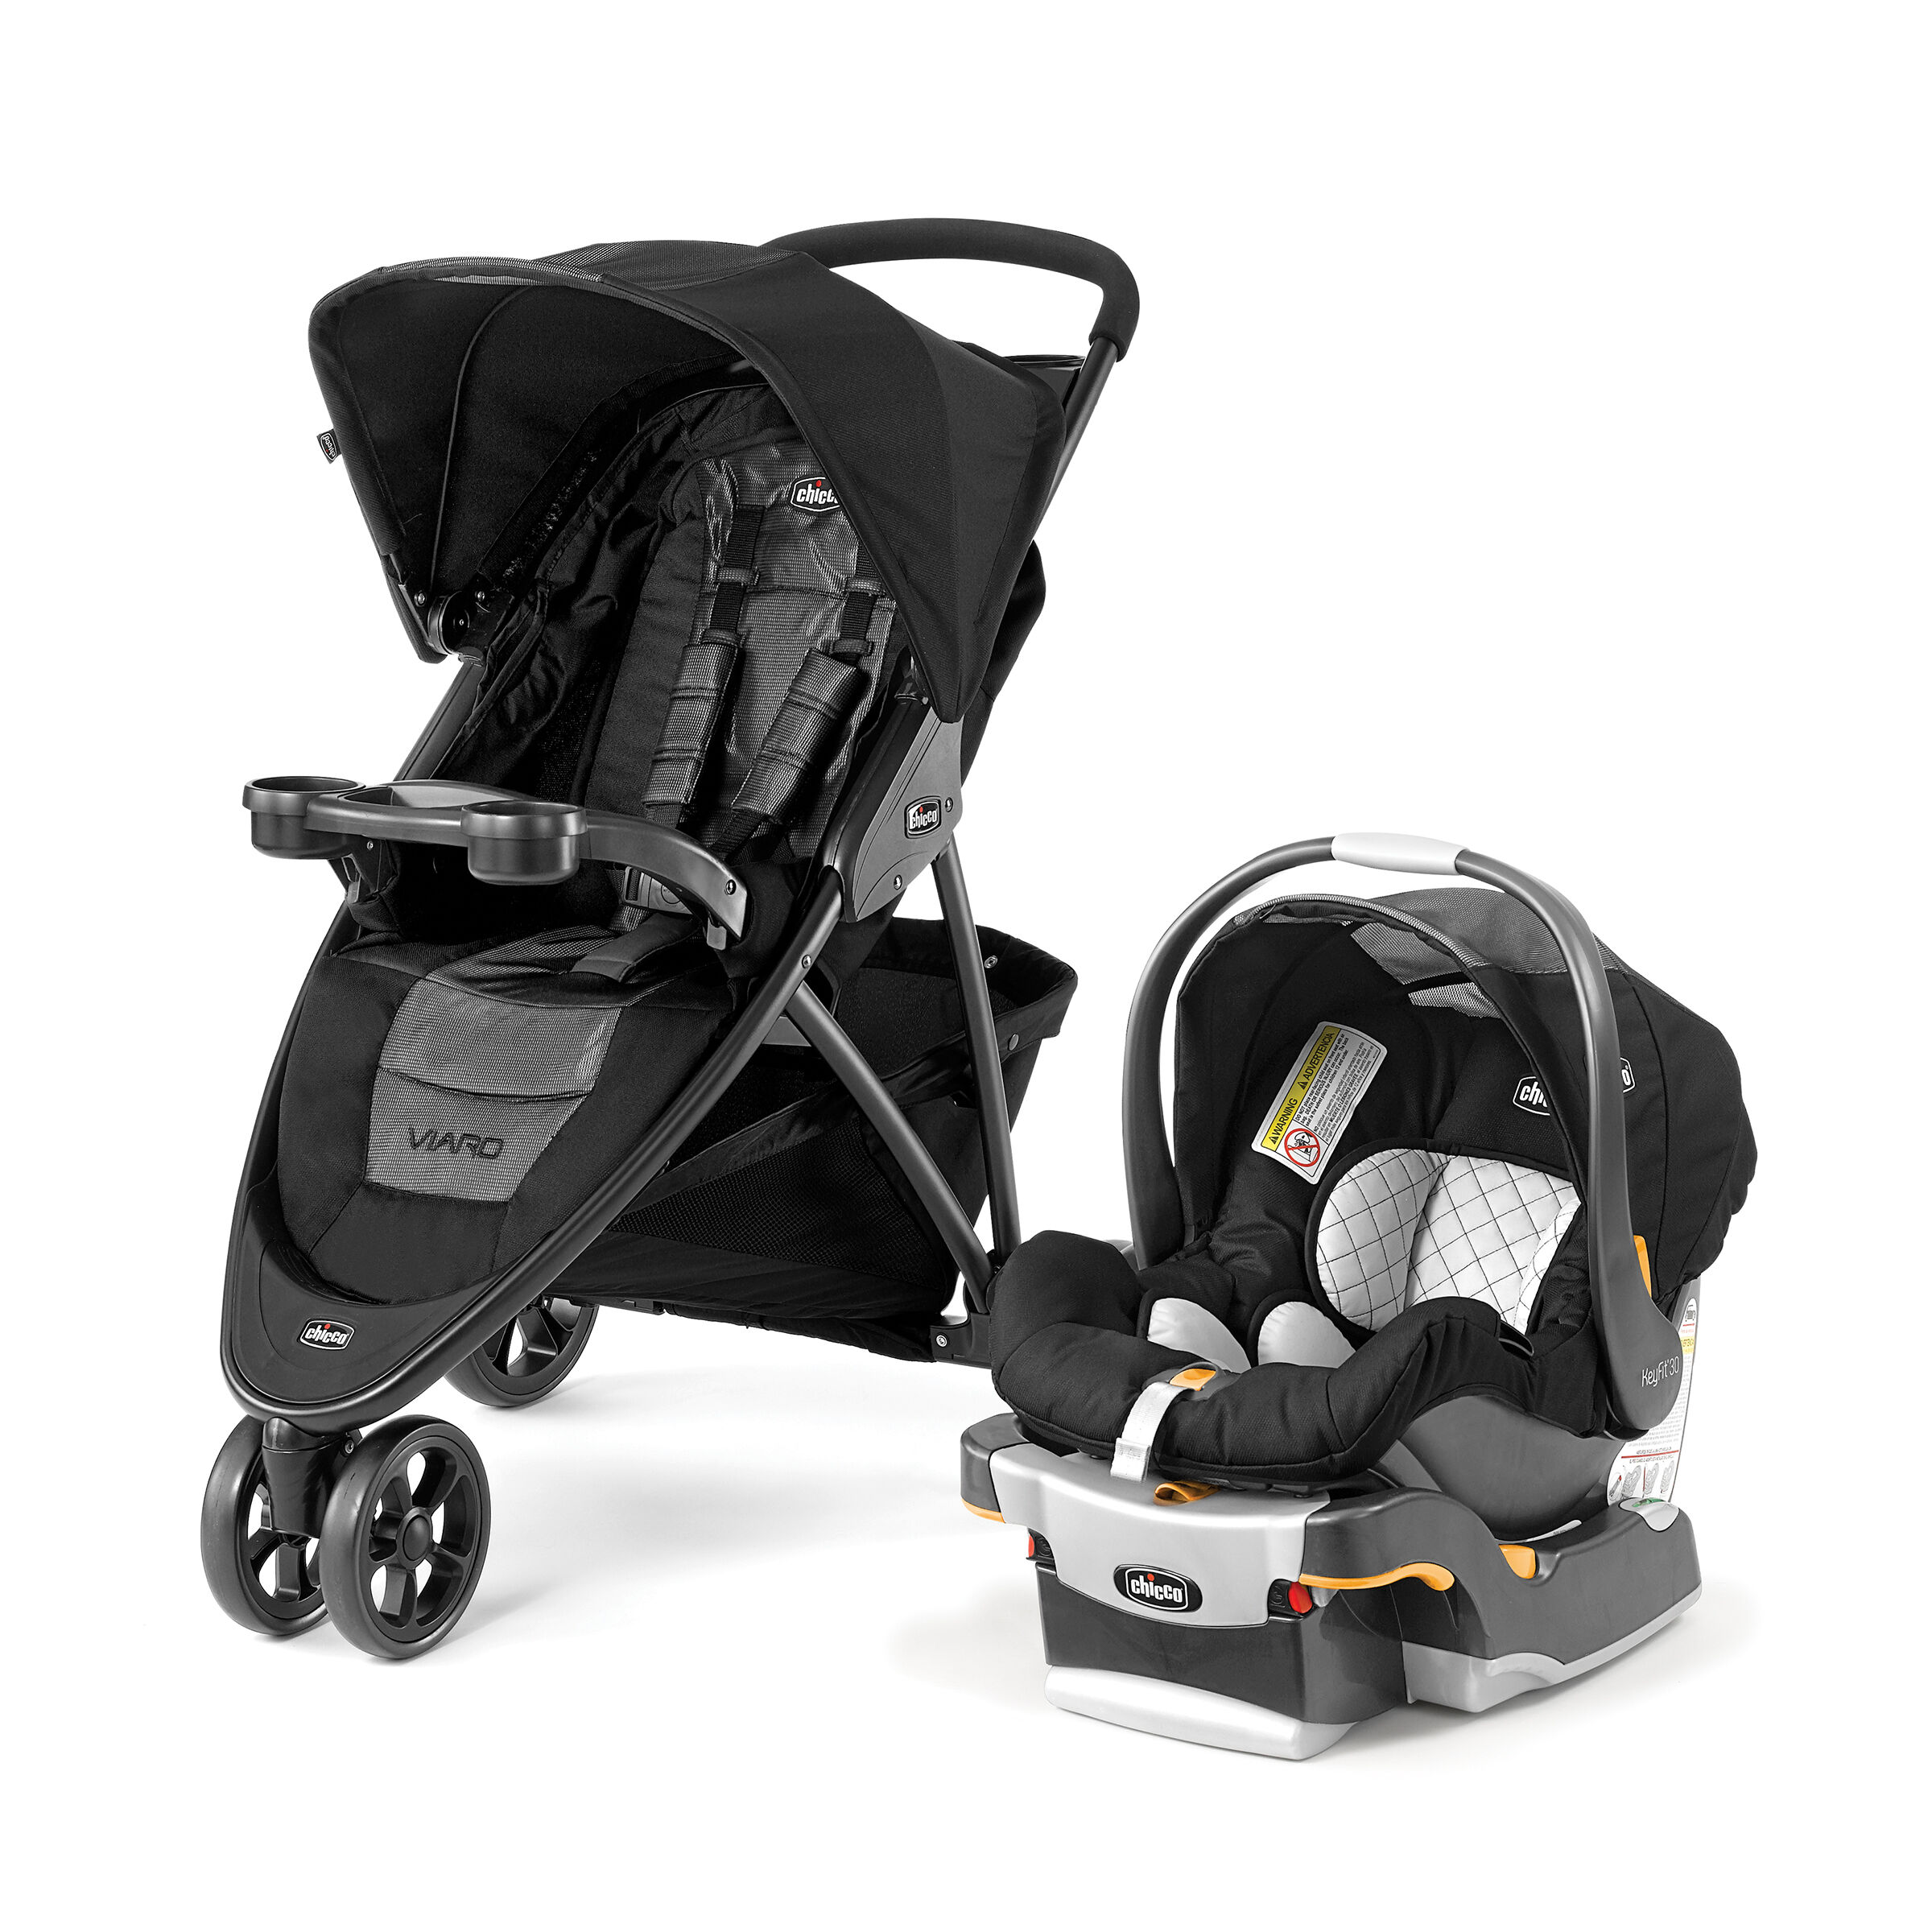 chicco infant car seat stroller